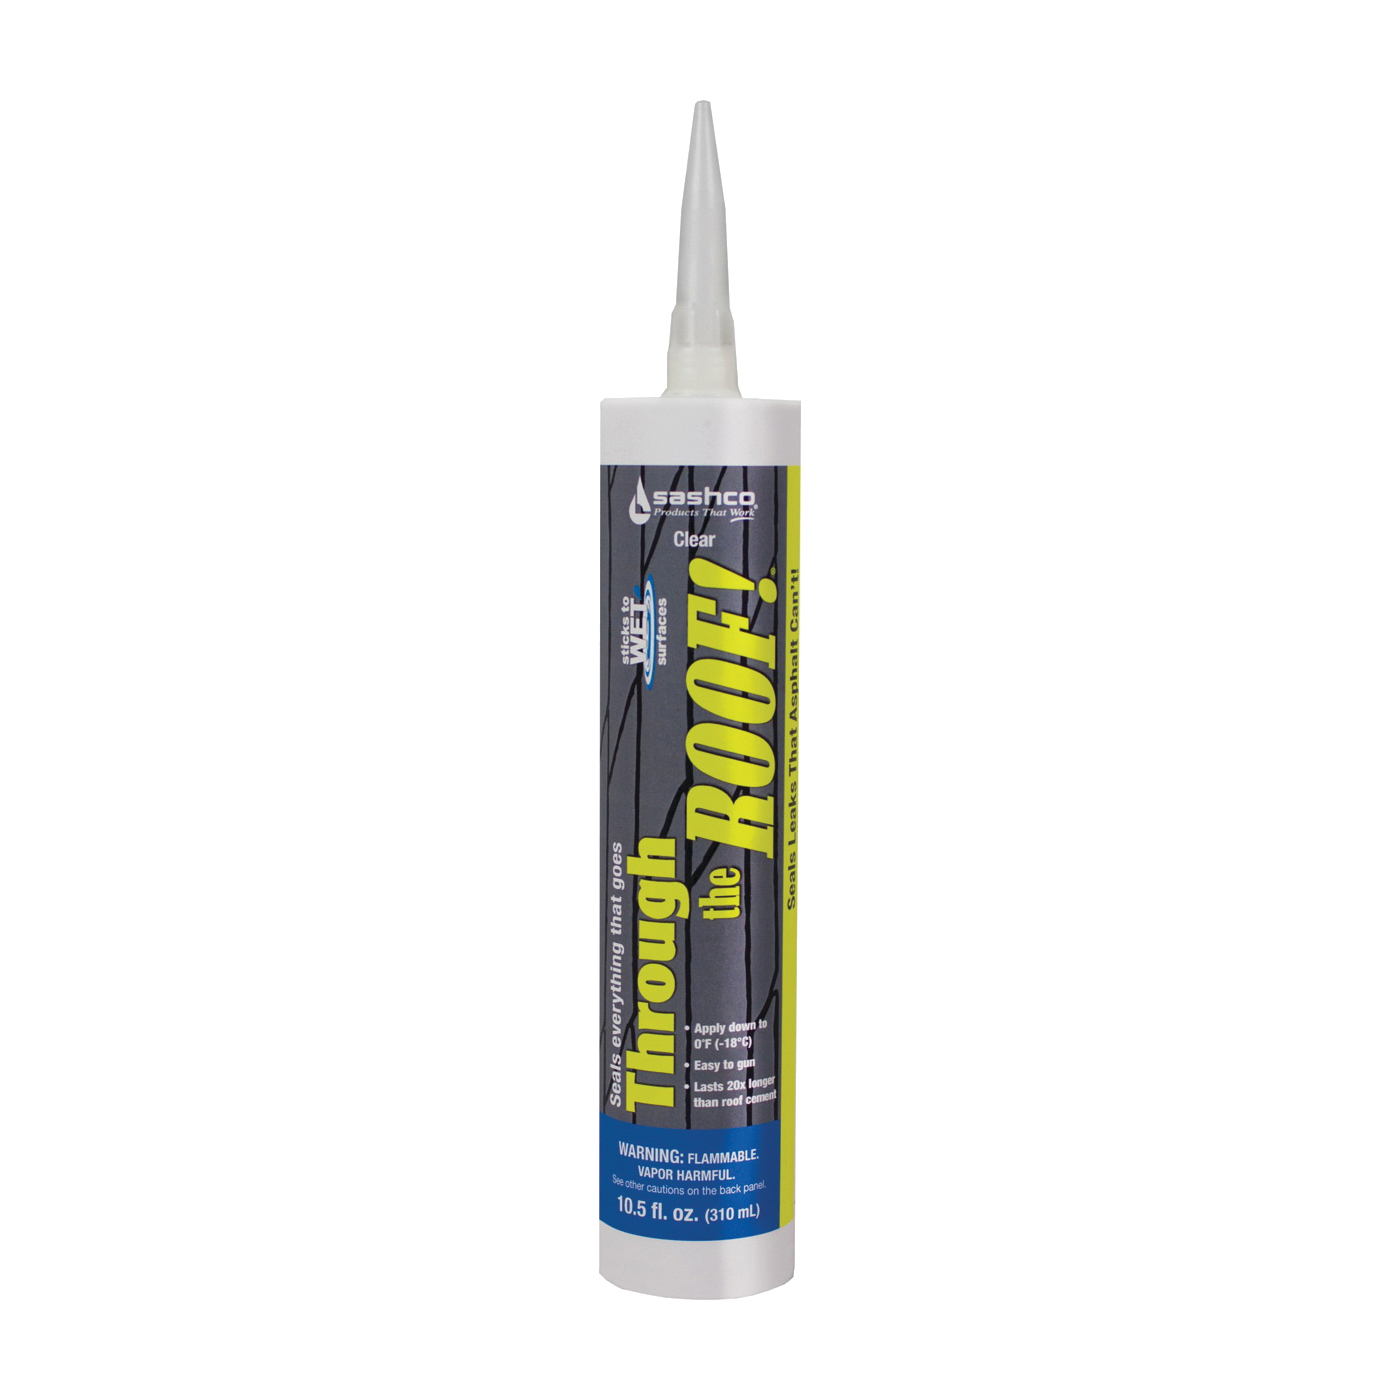 14010 Cement and Patching Sealant, Clear, Liquid, 10.5 oz Cartridge